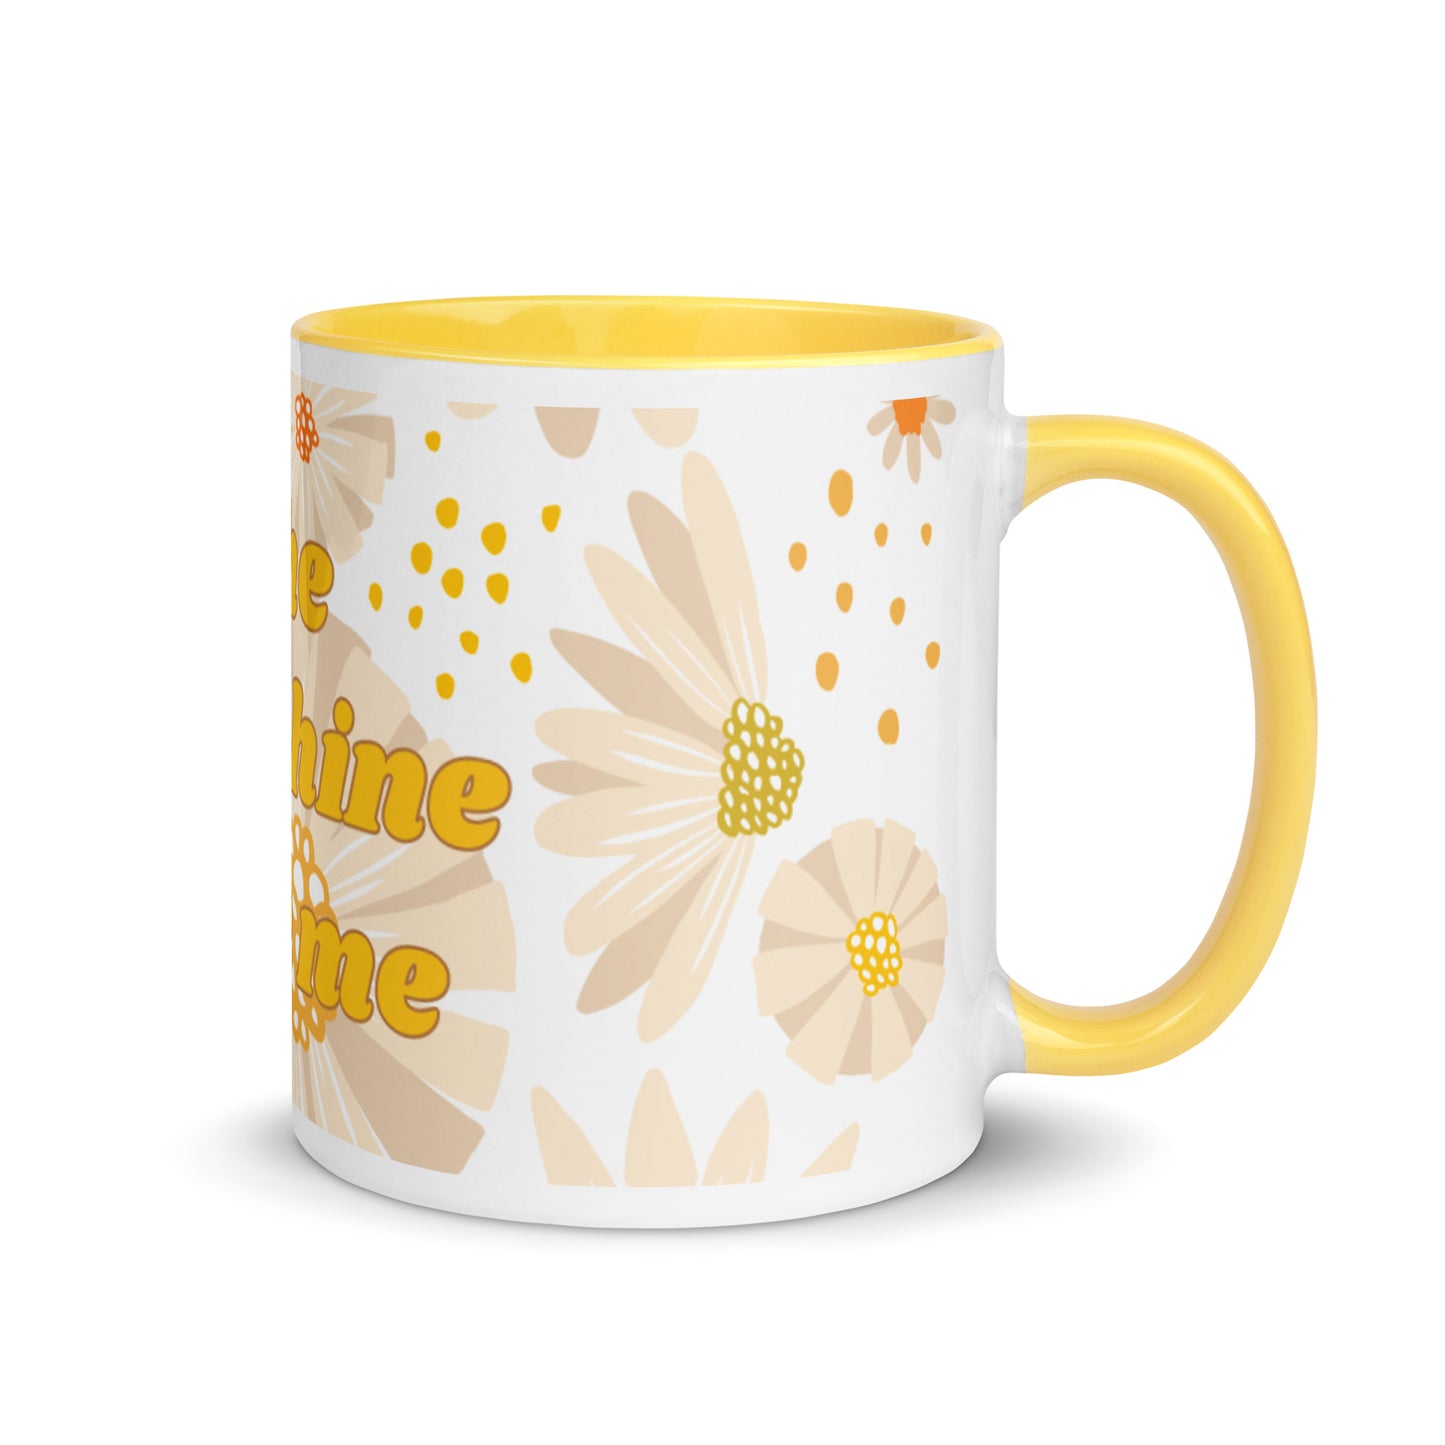 Tan Daisies Color Mug - The Sunshine is in me